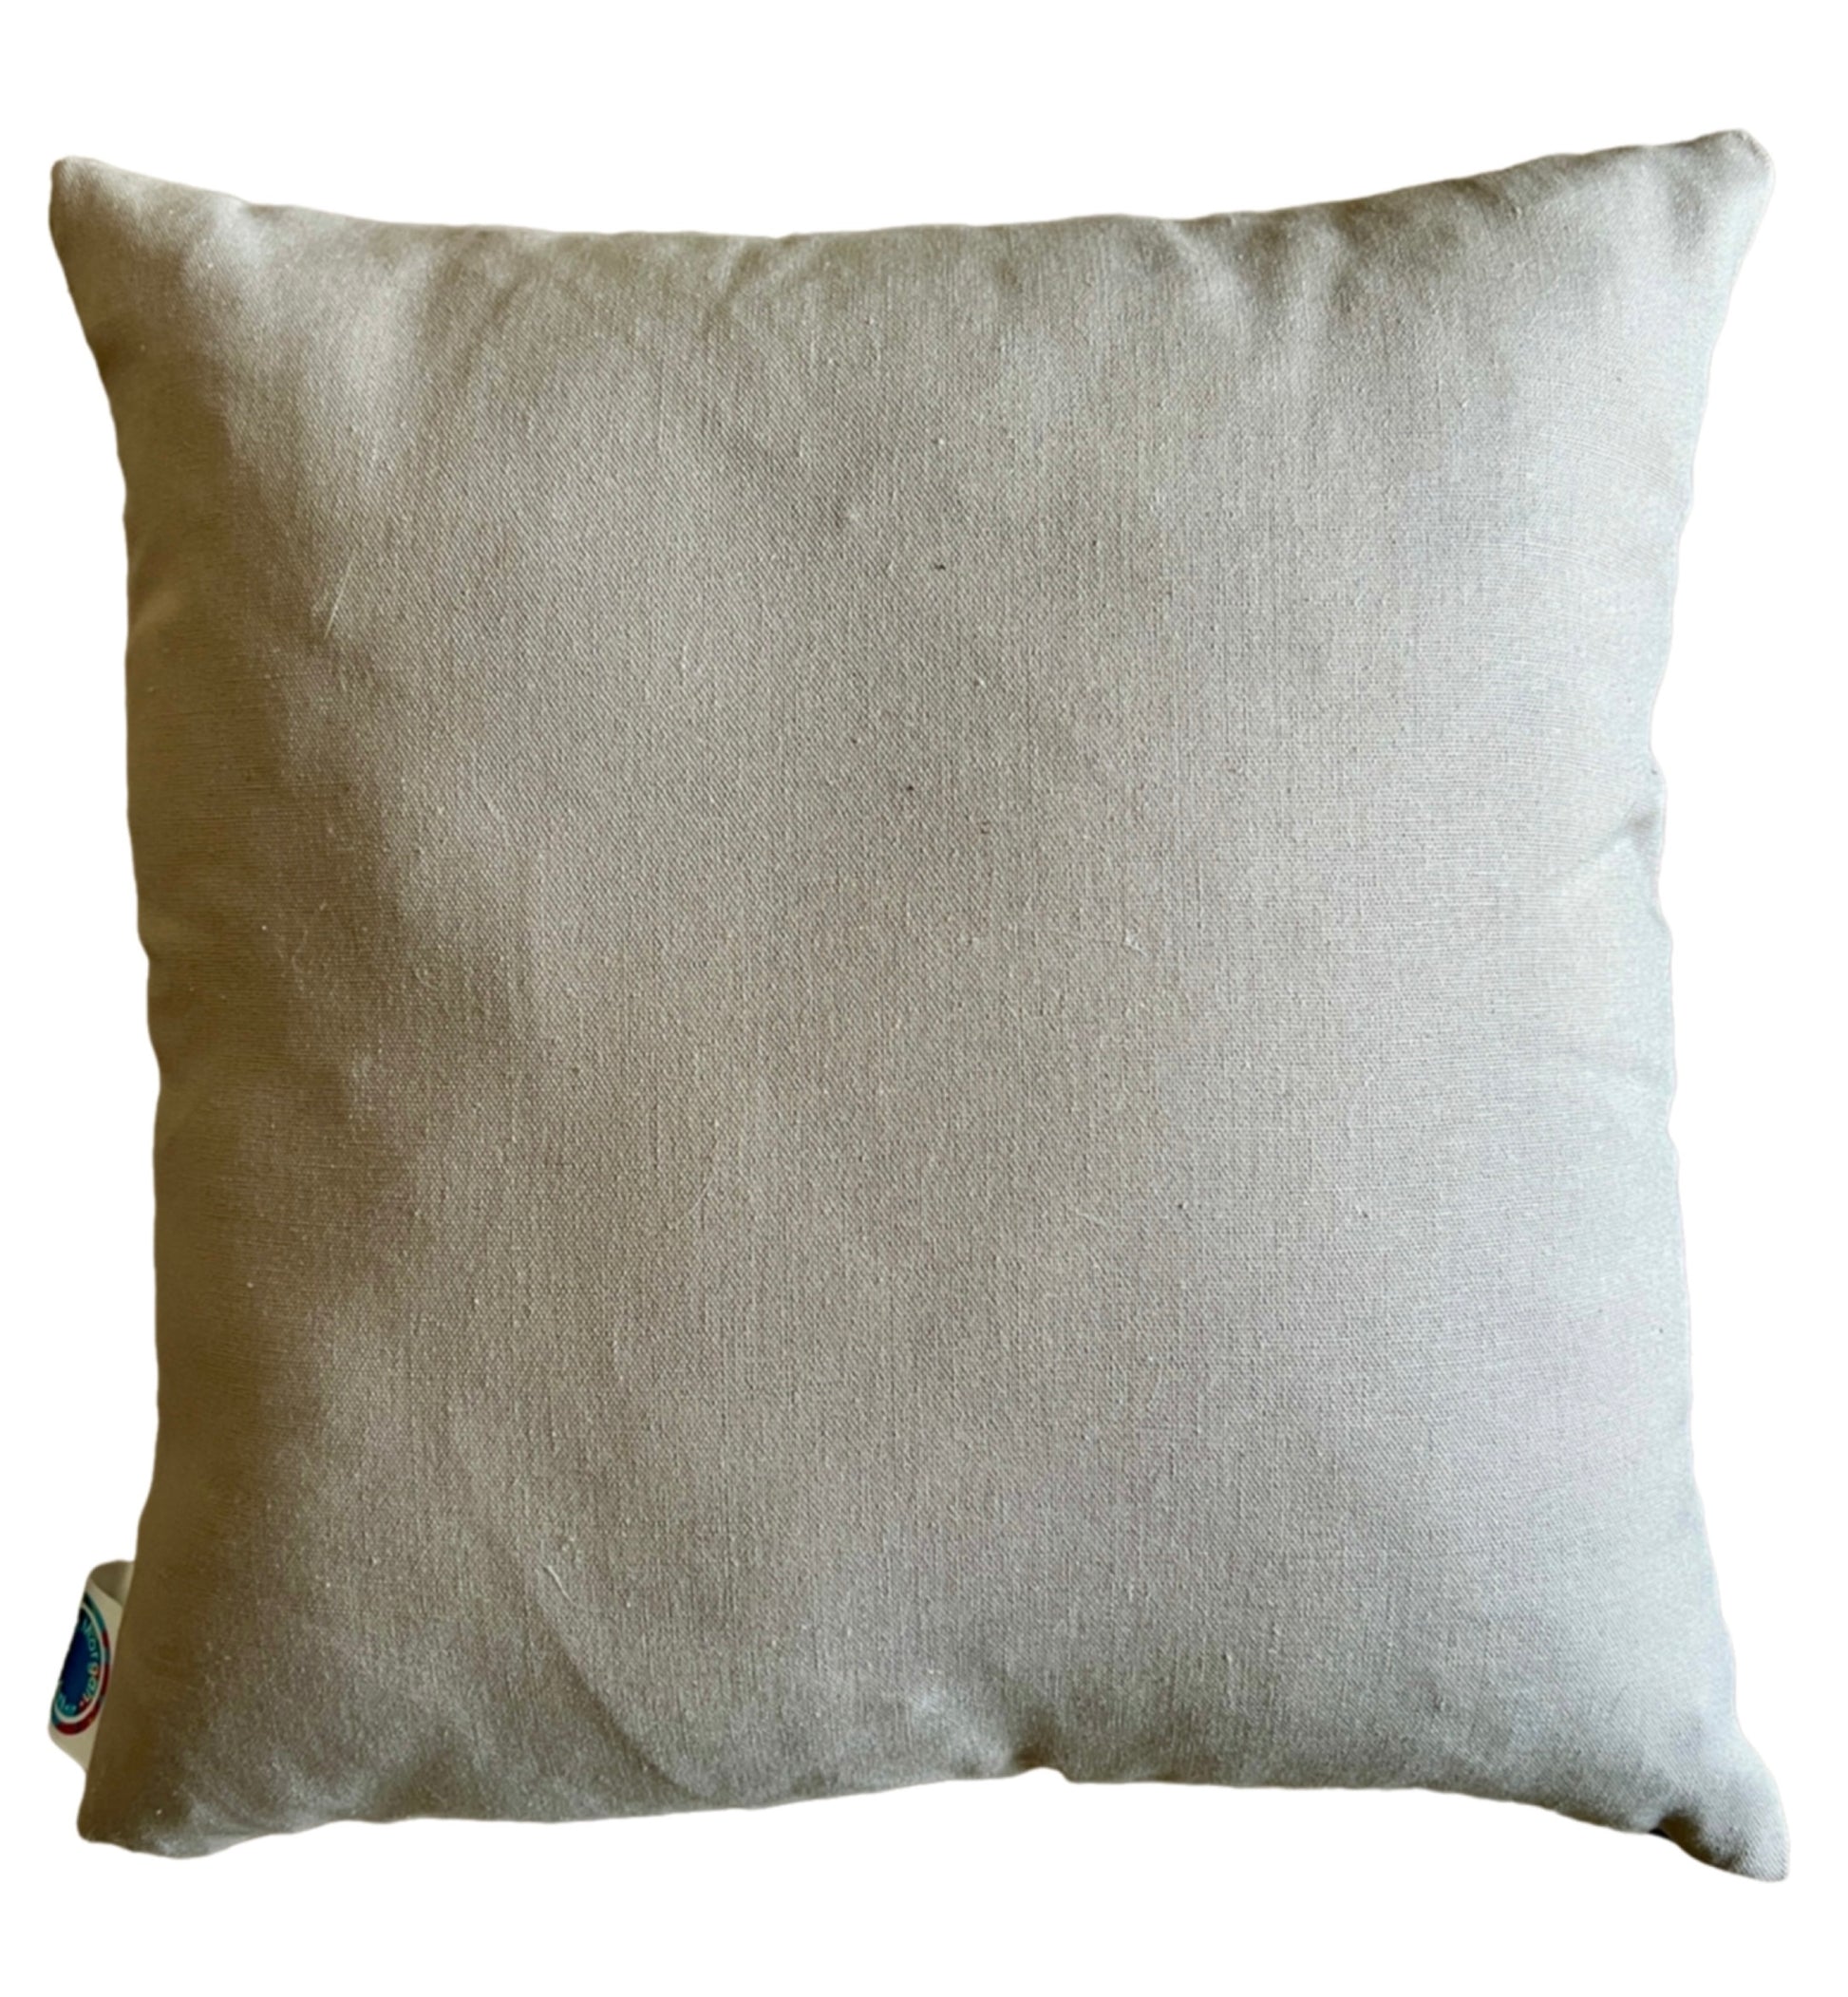 The back of the Sunset cushion by Beth Morgan Art. This consists of a plain beige fabric.